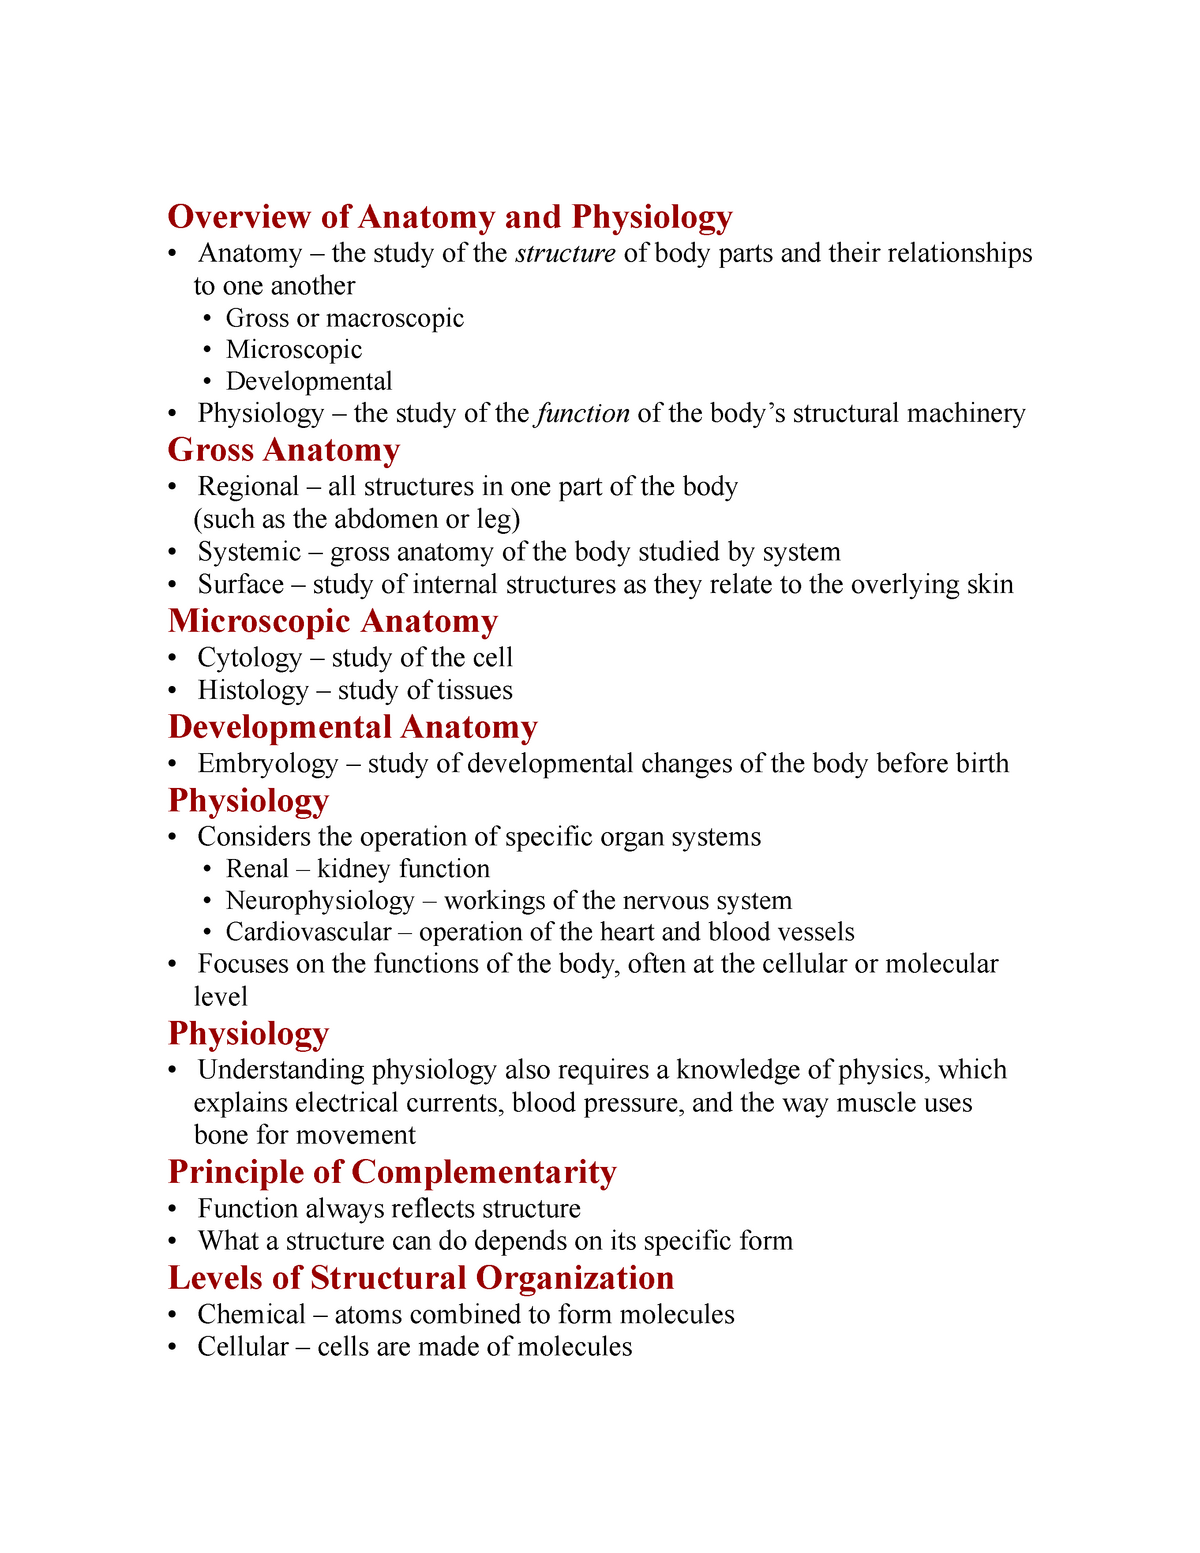 research paper topics for anatomy and physiology